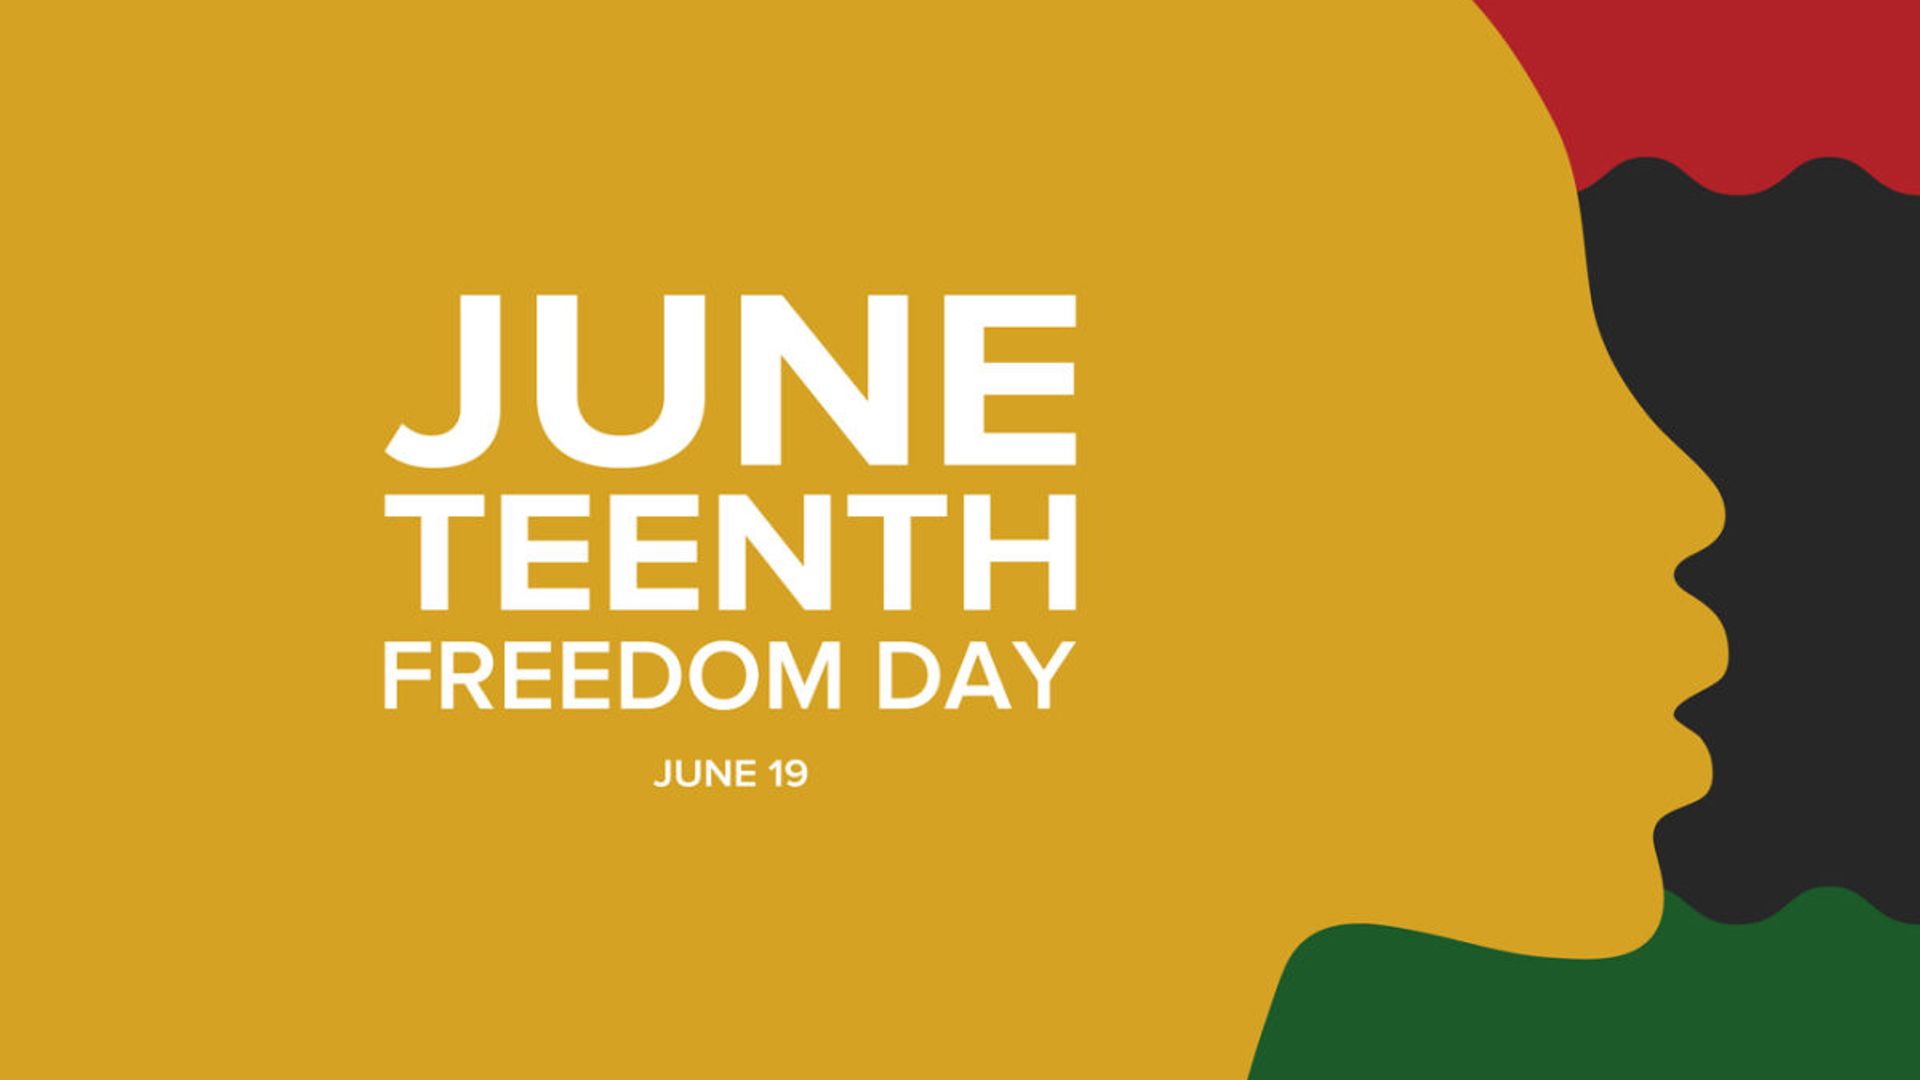 Juneteenth 2021: The best ways to celebrate Freedom Day